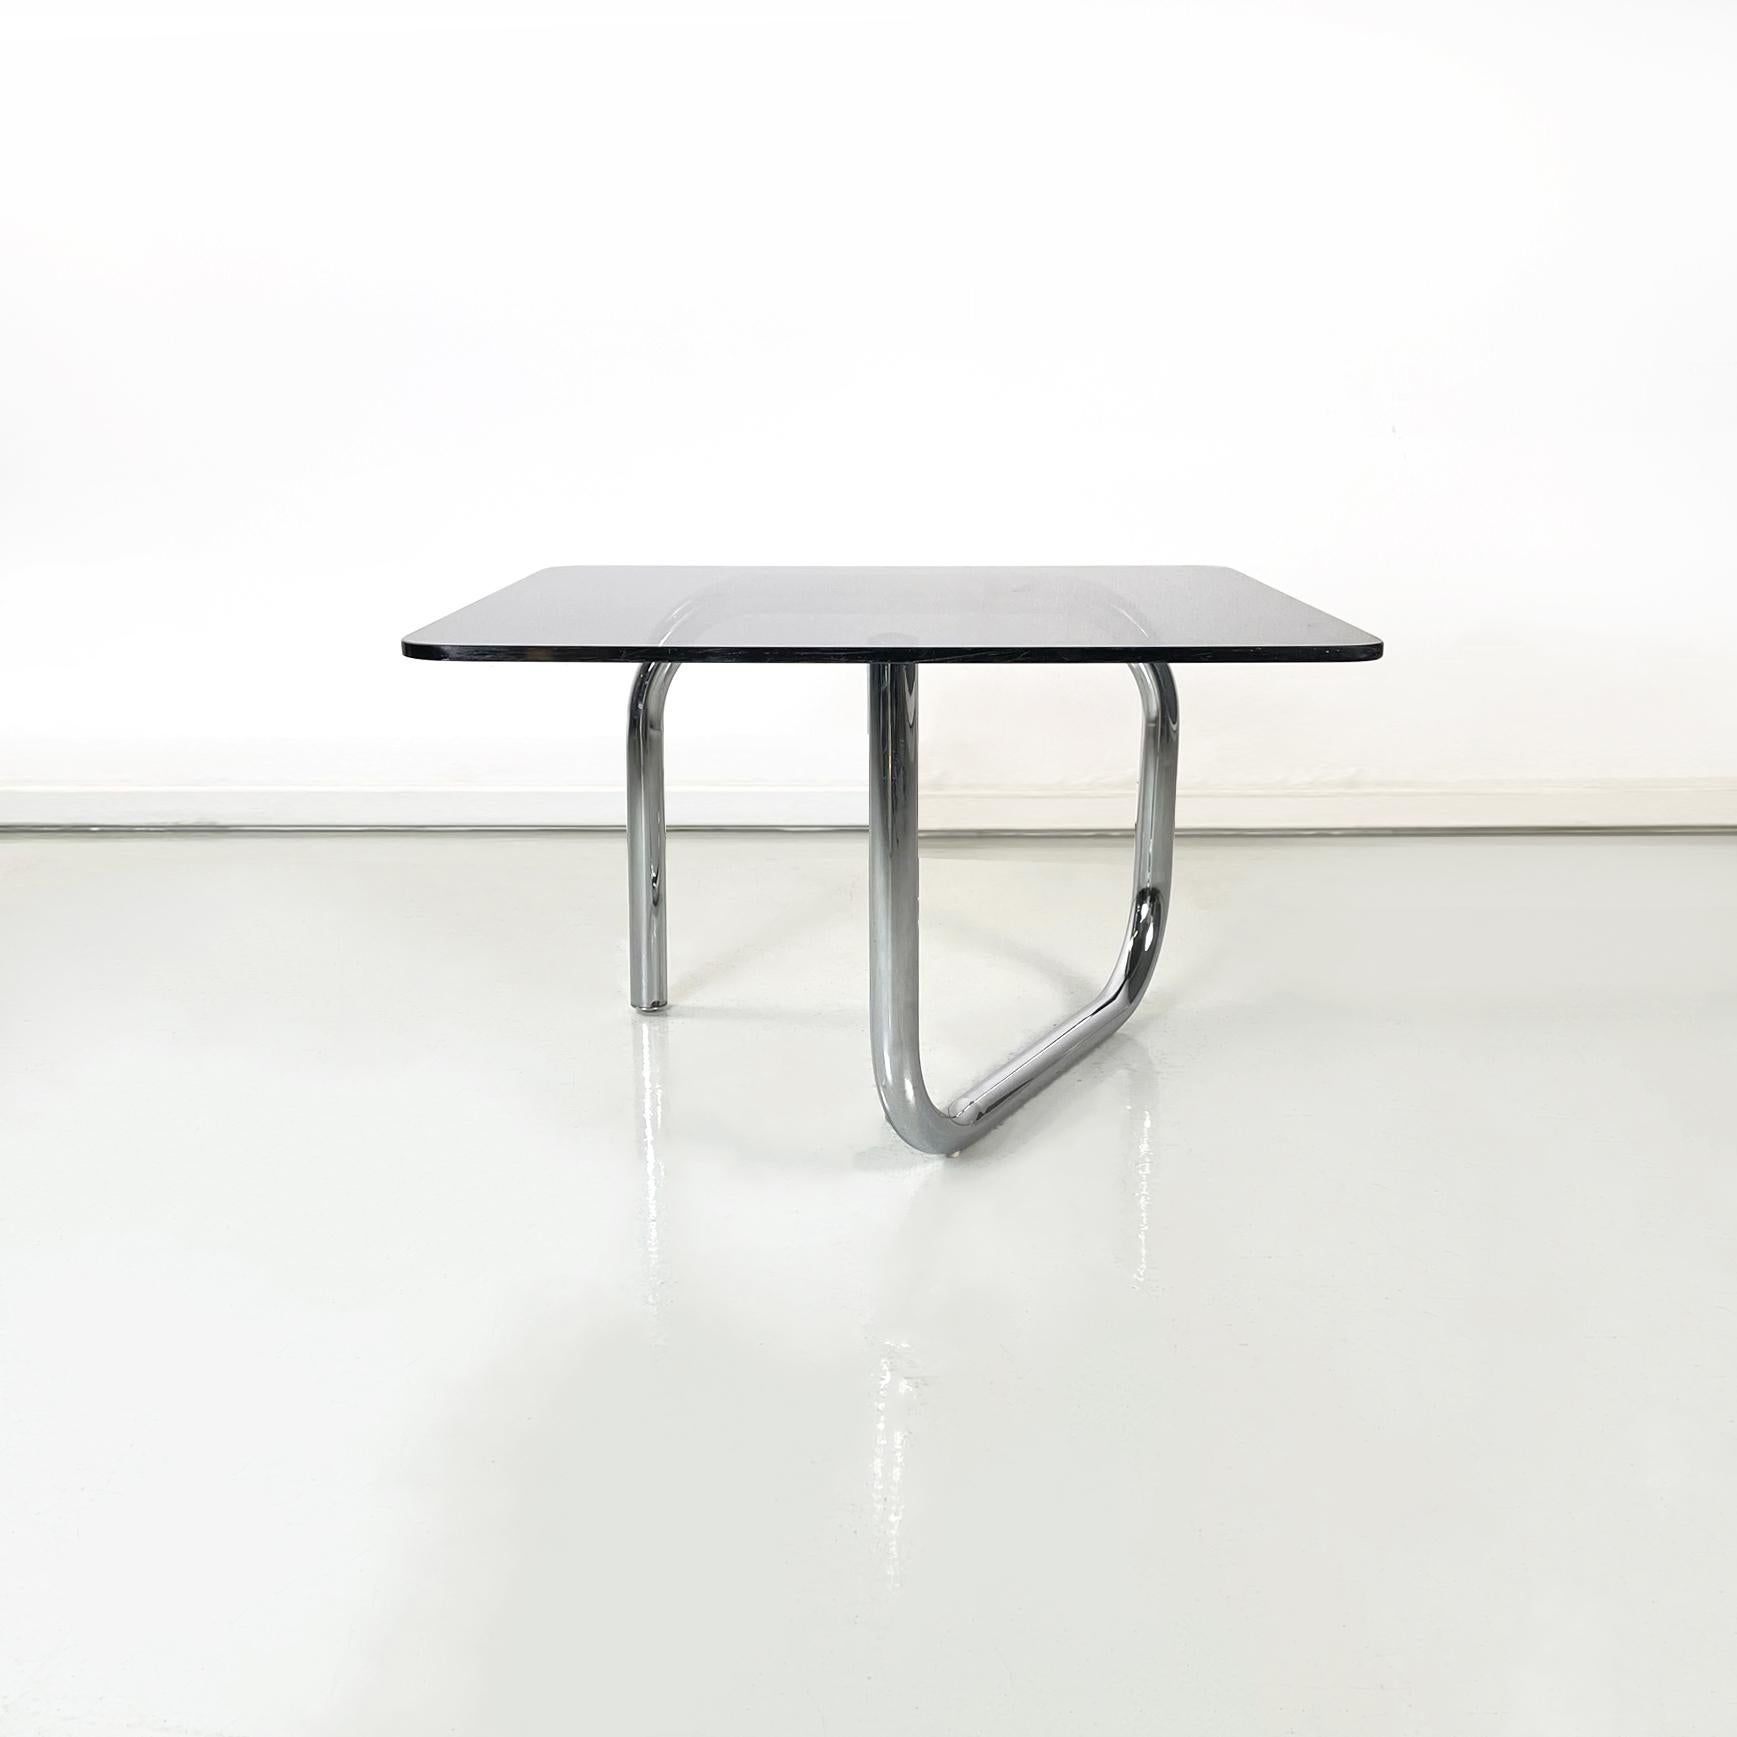 Late 20th Century Italian Modern Coffee Table with Rectangular Smoked Glass Chromed Steel, 1970s For Sale